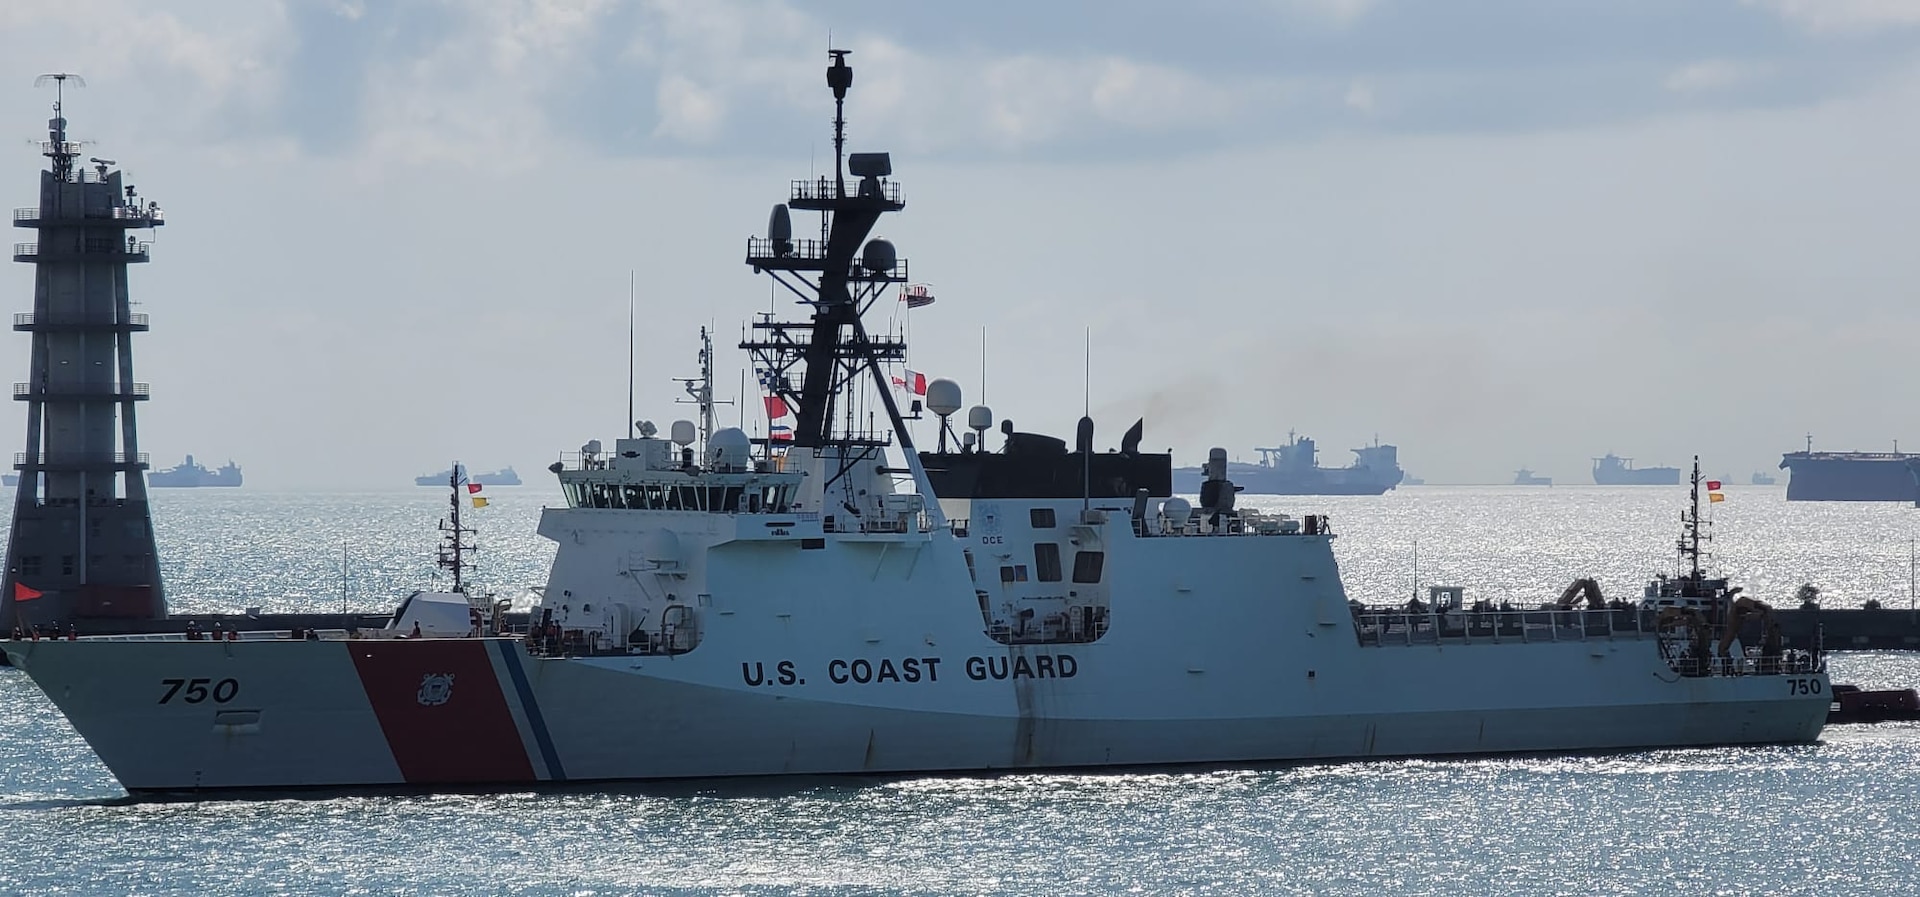 U.S. Coast Guard Cutter Bertholf (WMSL 750) arrives at Changi Naval Base in Singapore, Feb. 25, 2024. The Bertholf is a 418-foot National Security Cutter currently deployed to the Indo-Pacific region under the tactical control of U.S. 7th Fleet. (U.S. Coast Guard photo by Cmdr. Trevor Parra)